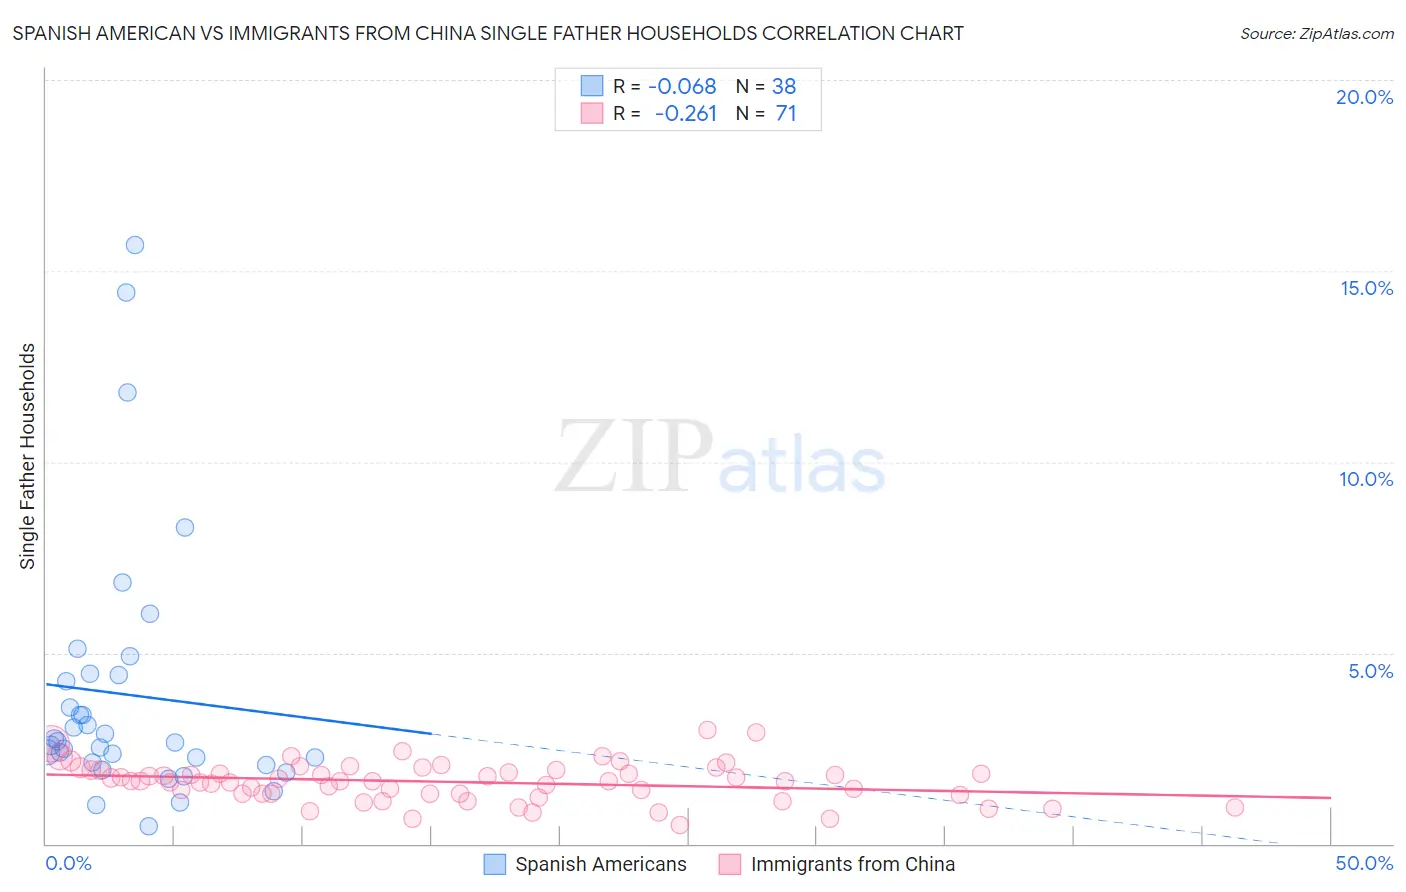 Spanish American vs Immigrants from China Single Father Households